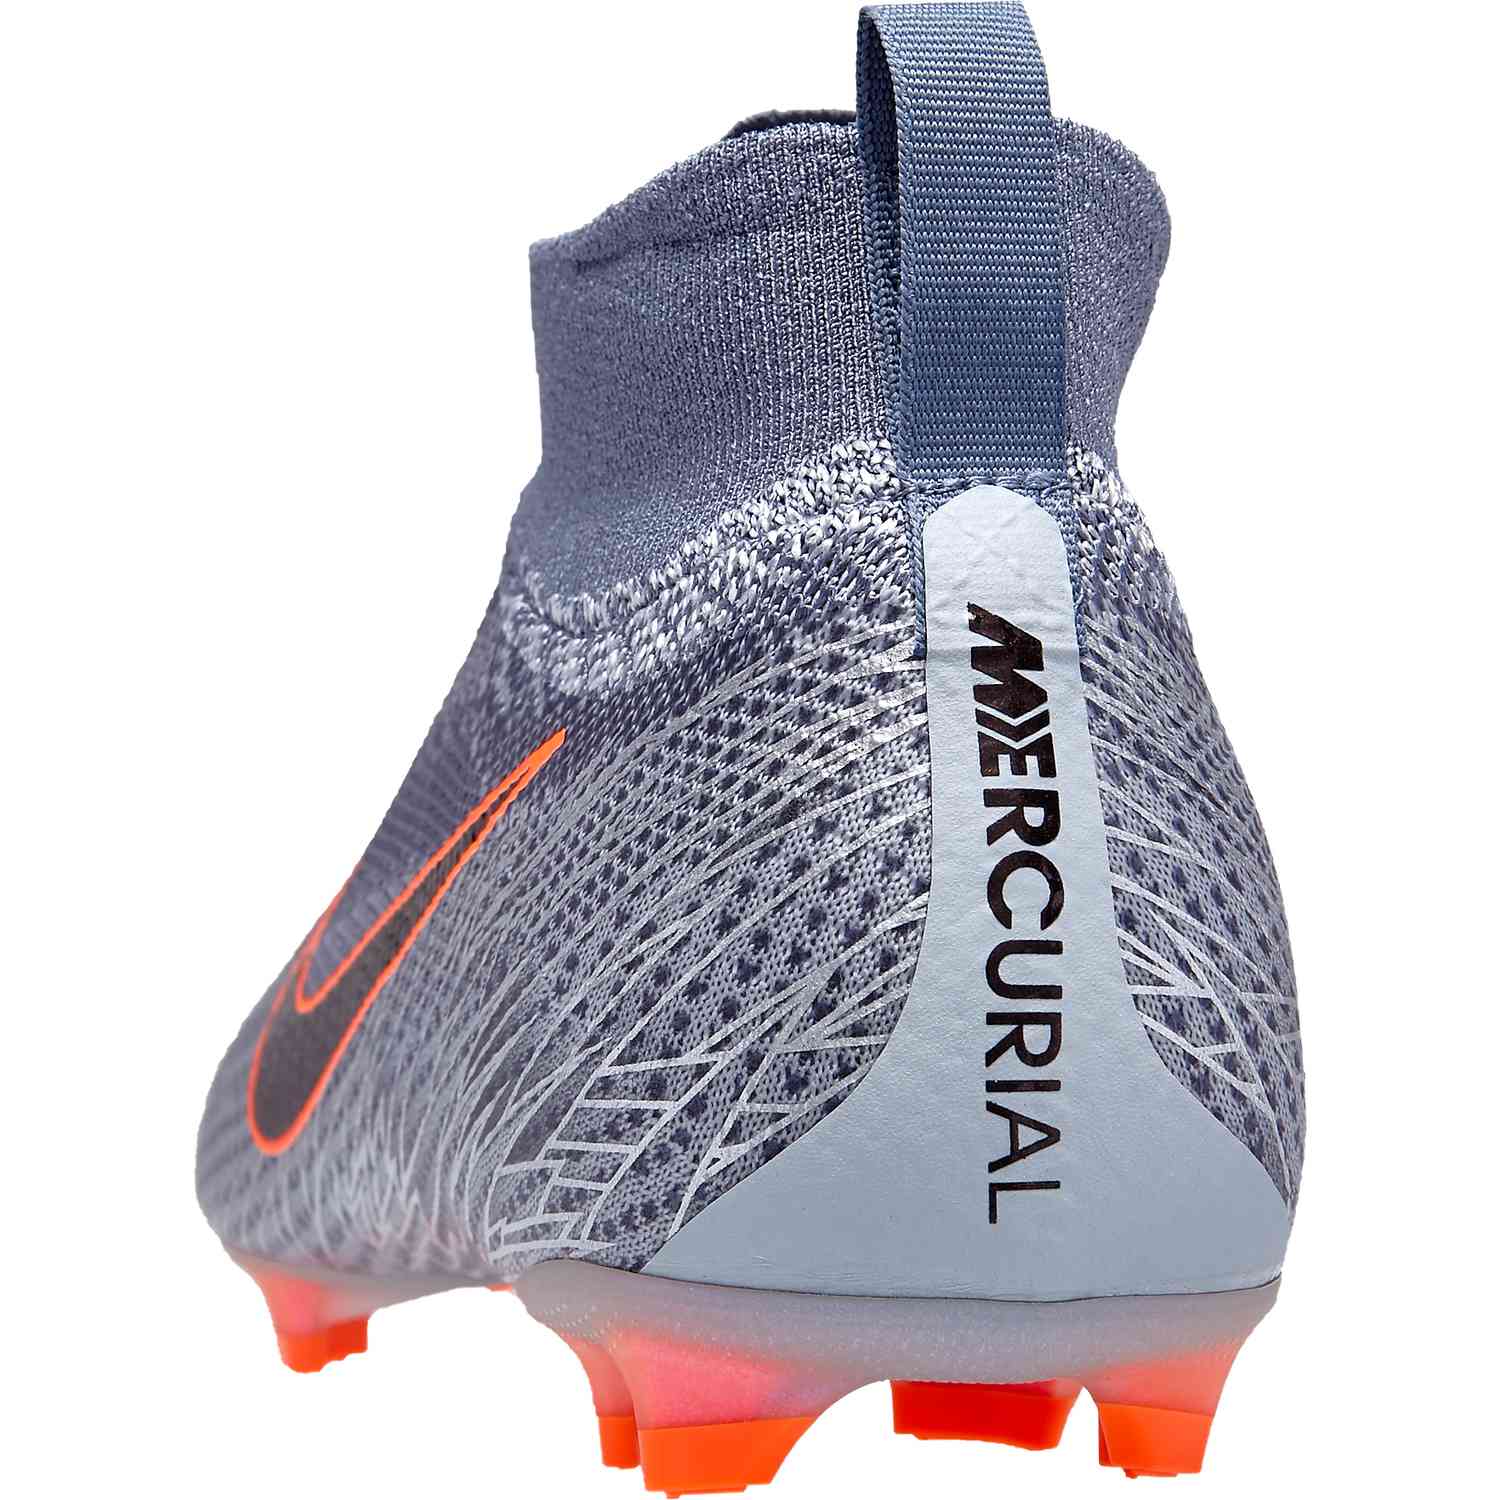 mercurial superfly victory